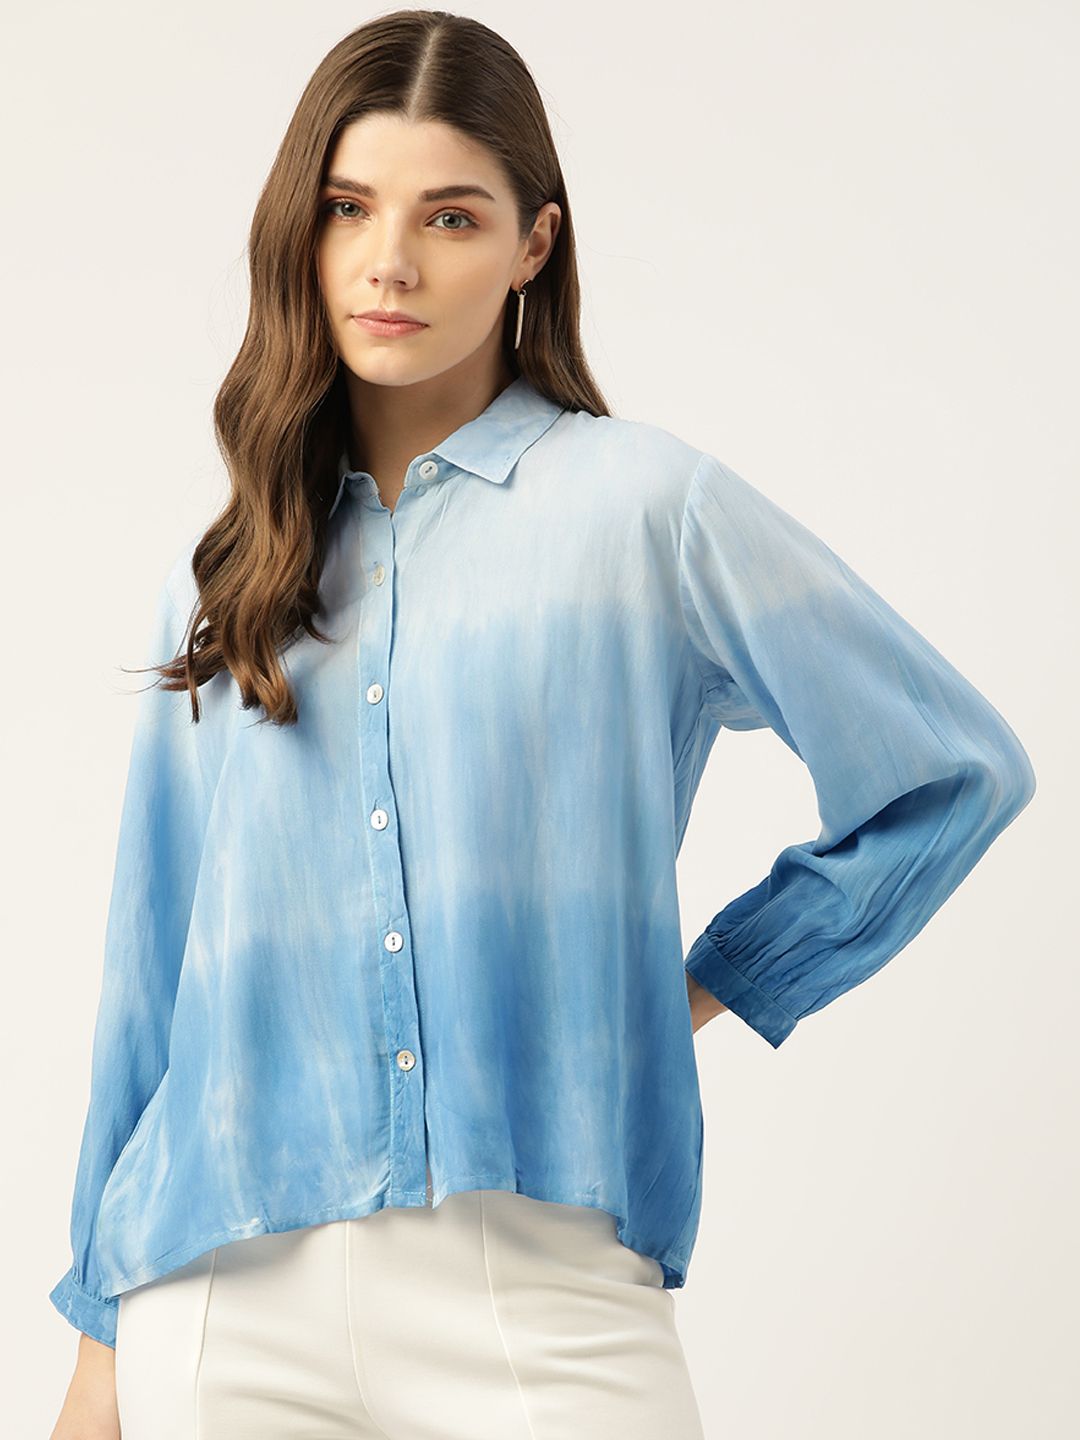 Maaesa Blue Tie and Dye Shirt Style Top Price in India